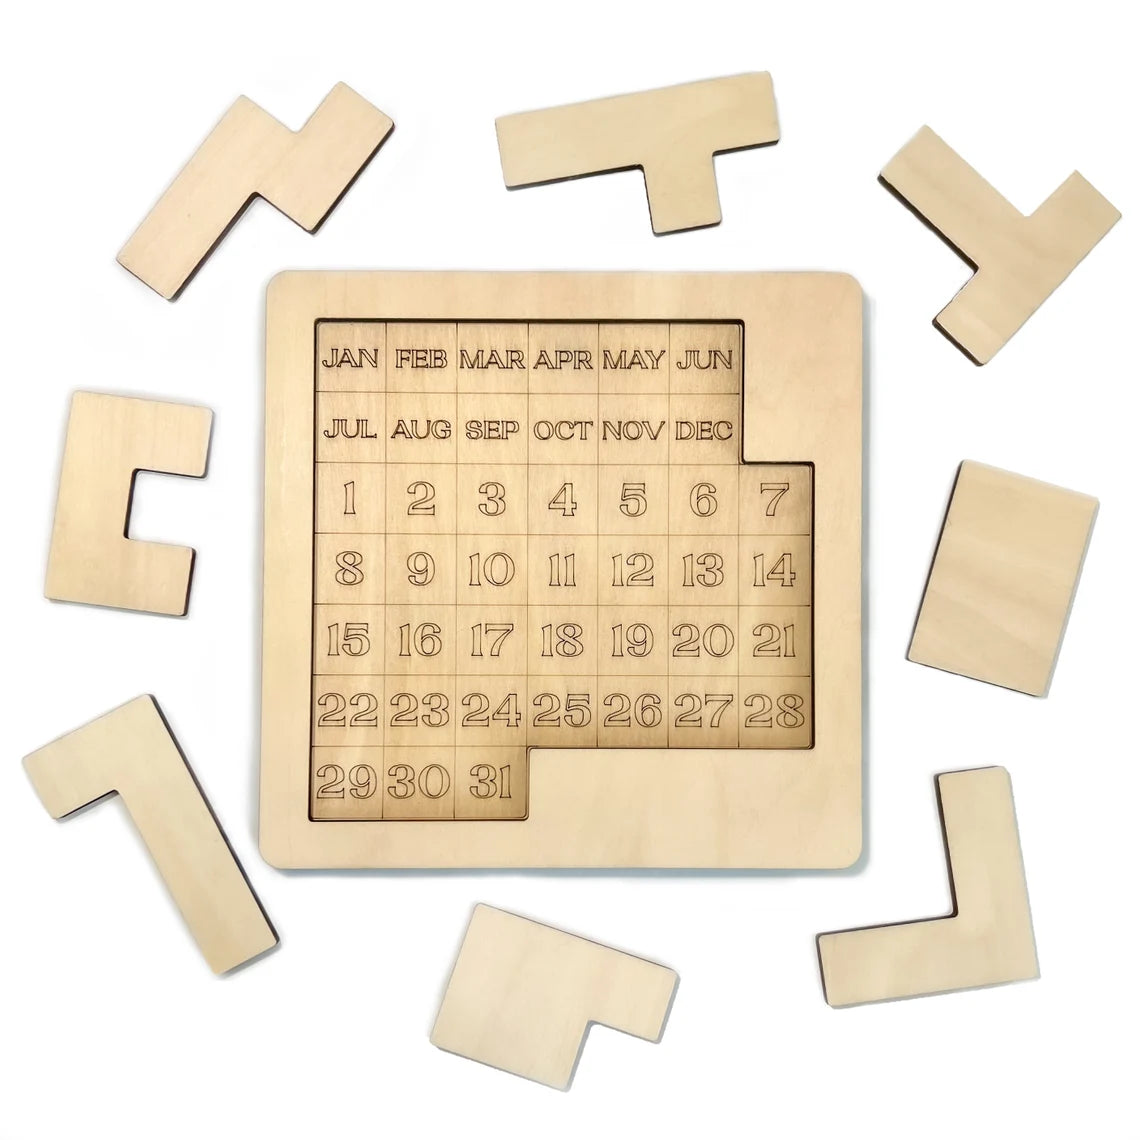 Large Daily Calendar Puzzle (Solid Wood) for Coffee Tables